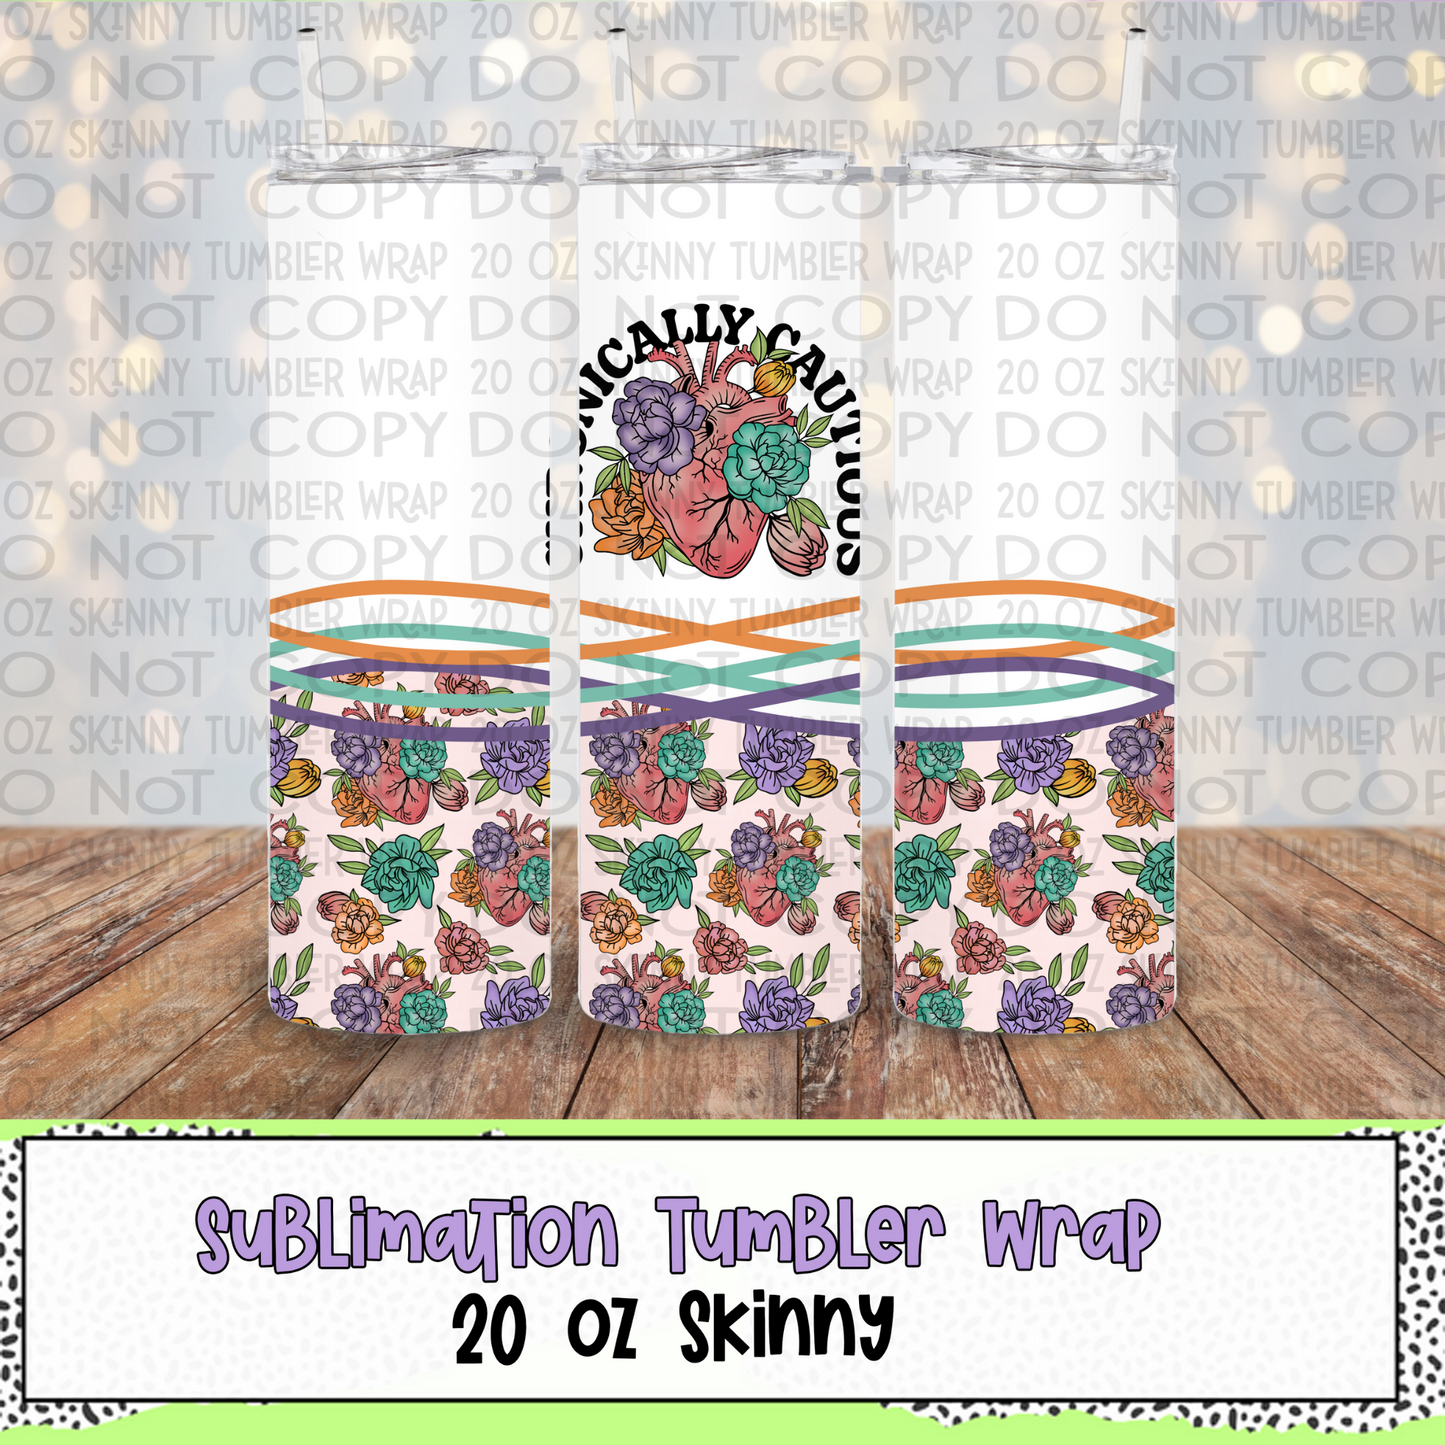 Overly Cautious 20 Oz Skinny Tumbler Wrap - Sublimation Transfer - RTS